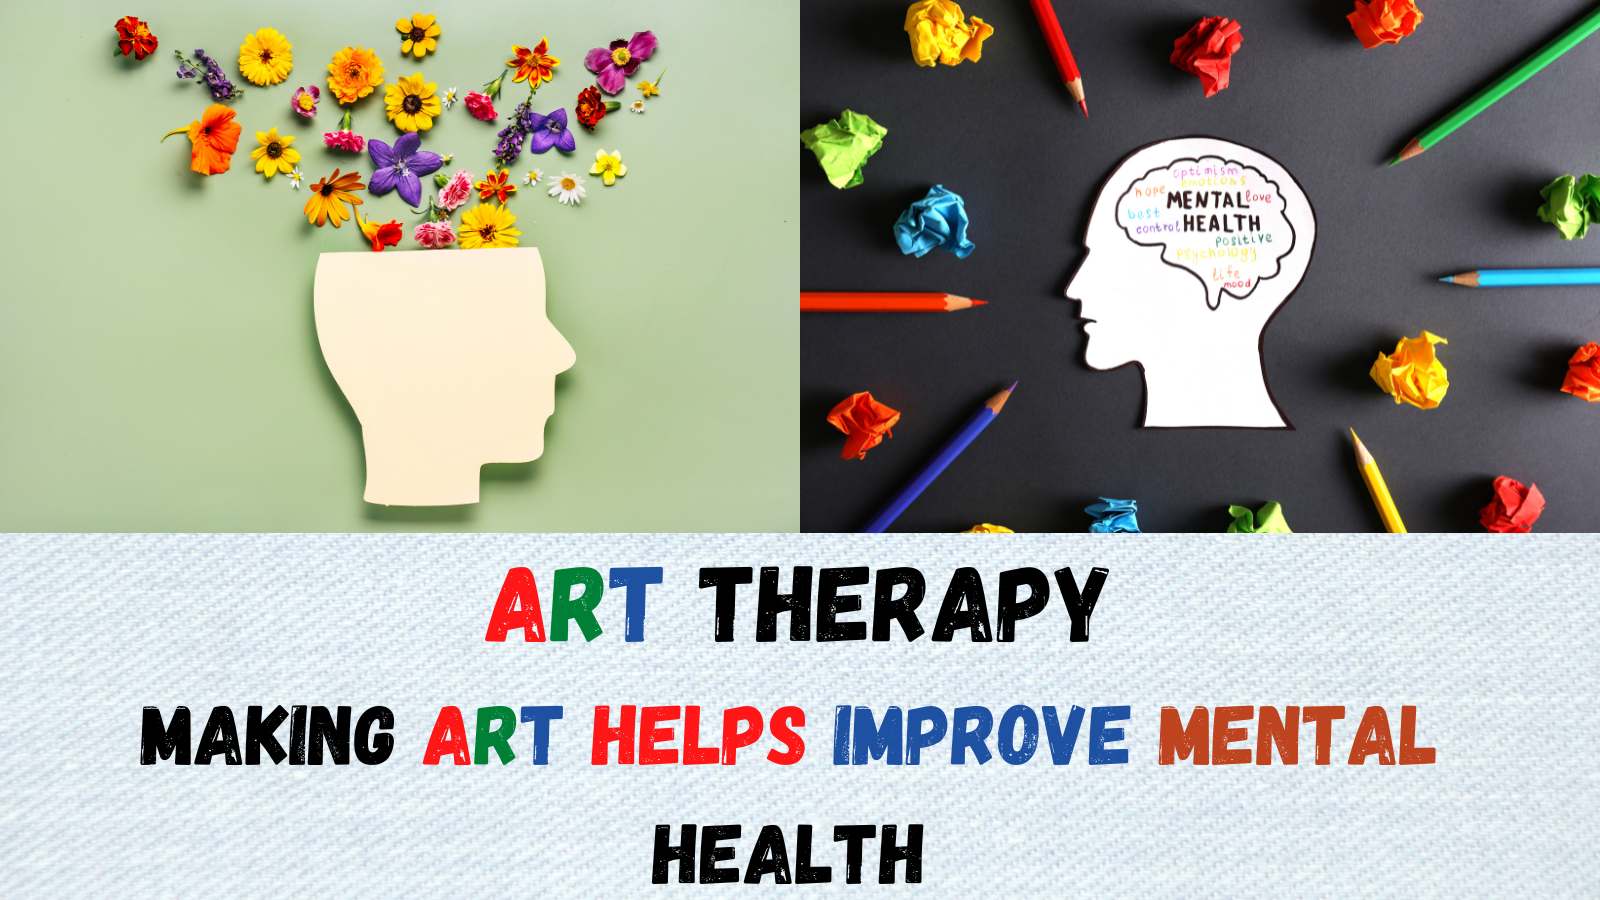 Making ART Helps Improve Mental Health - ART Therapy